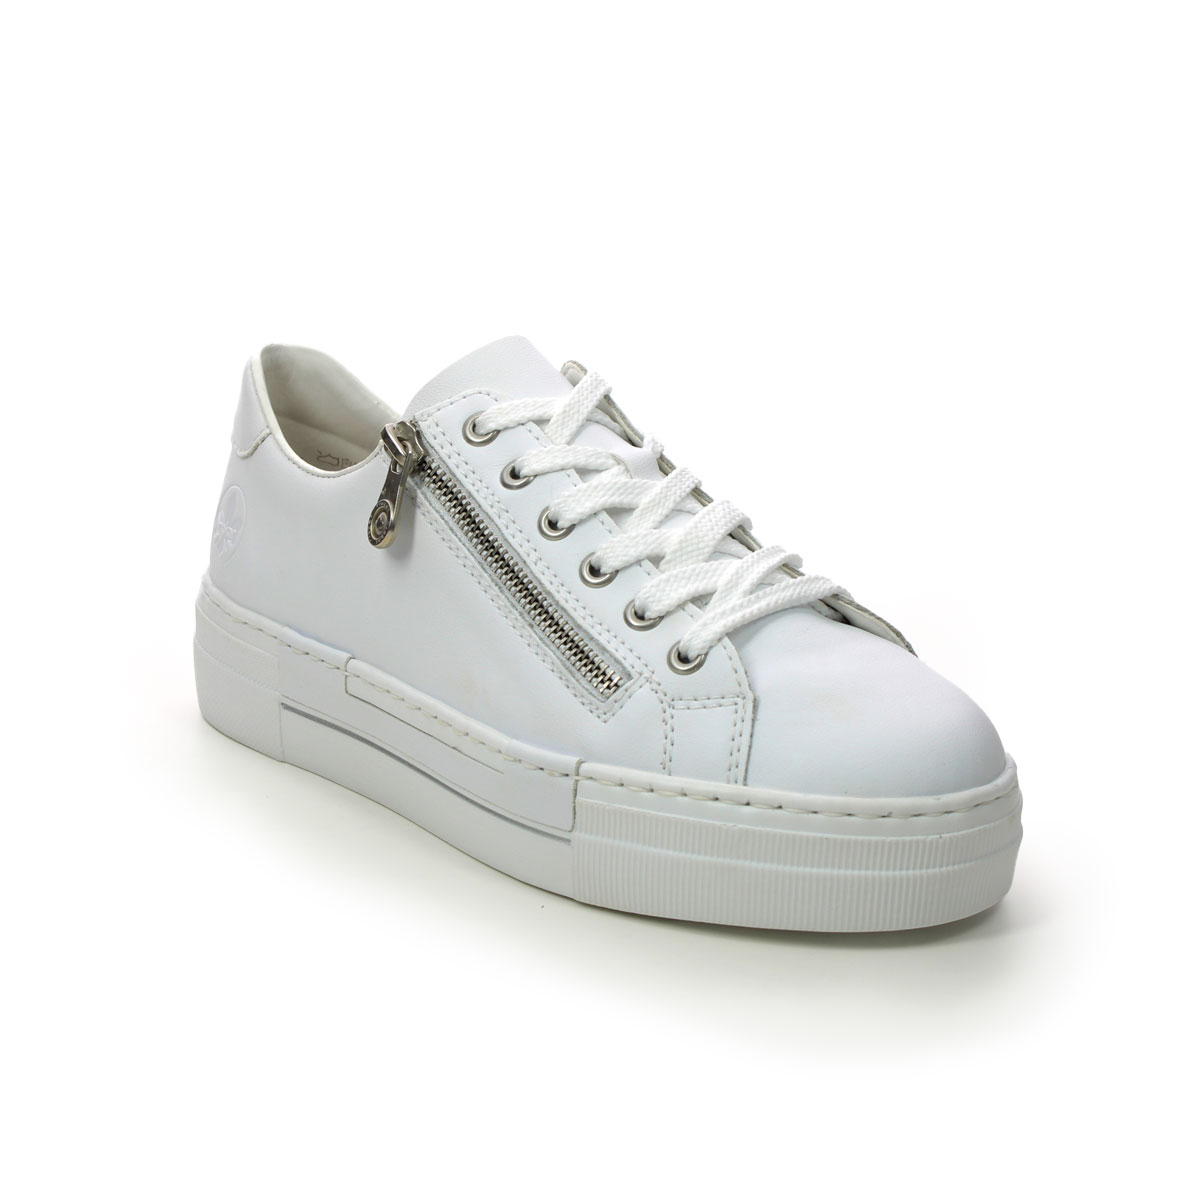 Rieker N4921-81 WHITE LEATHER Womens trainers in a Plain Leather in Size 40